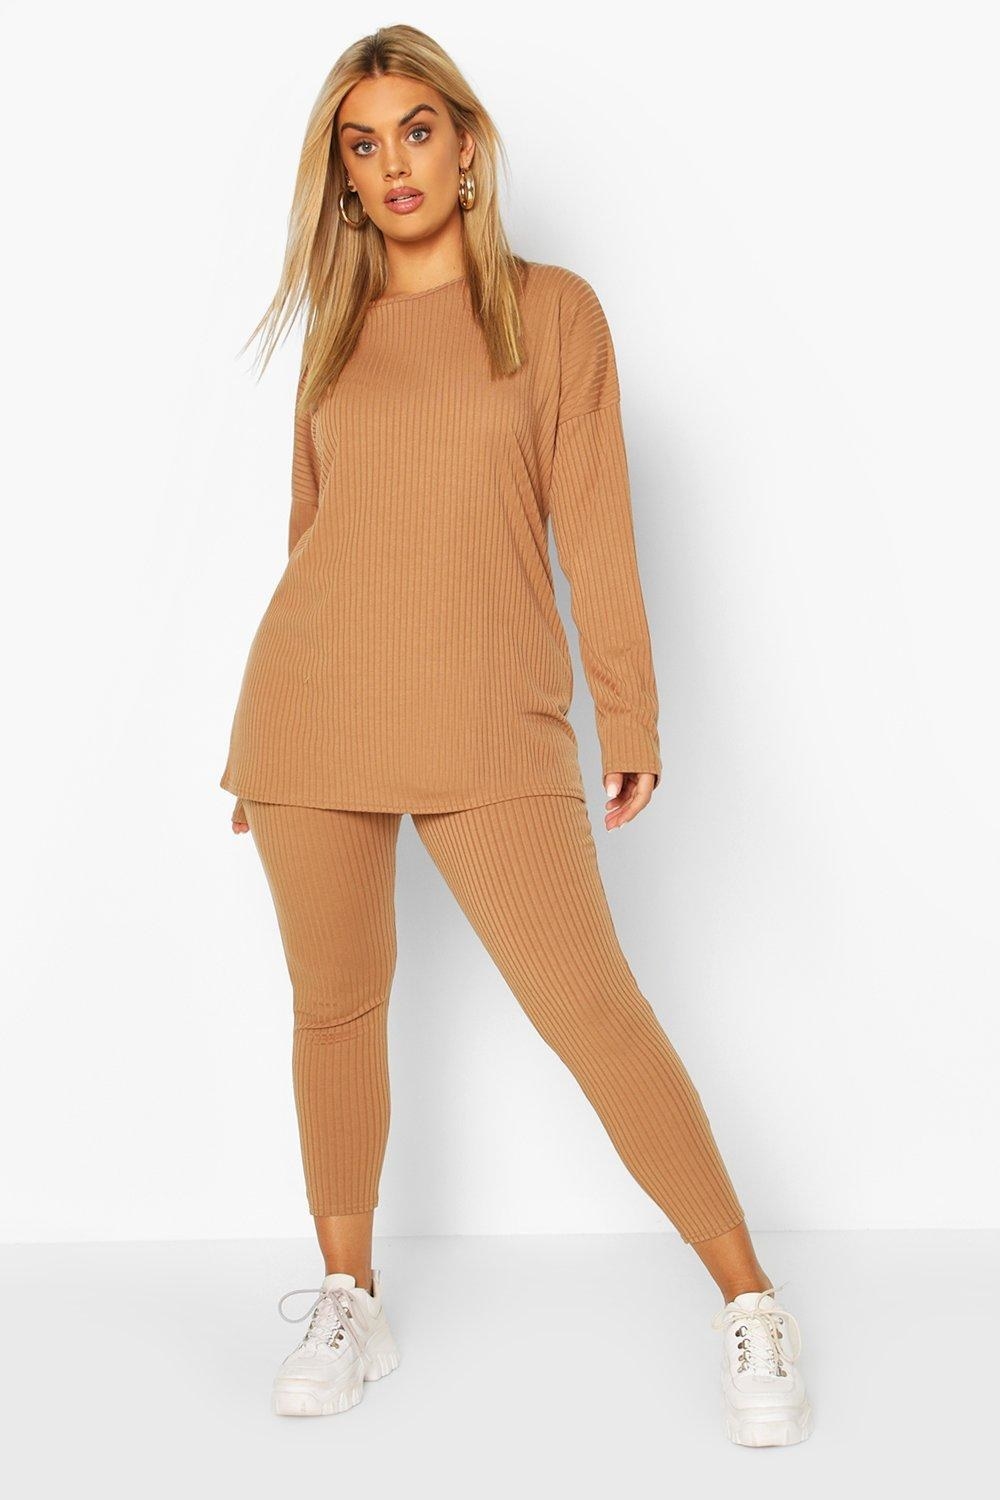 plus size model wearing camel loose top and leggings in ribbed fabric